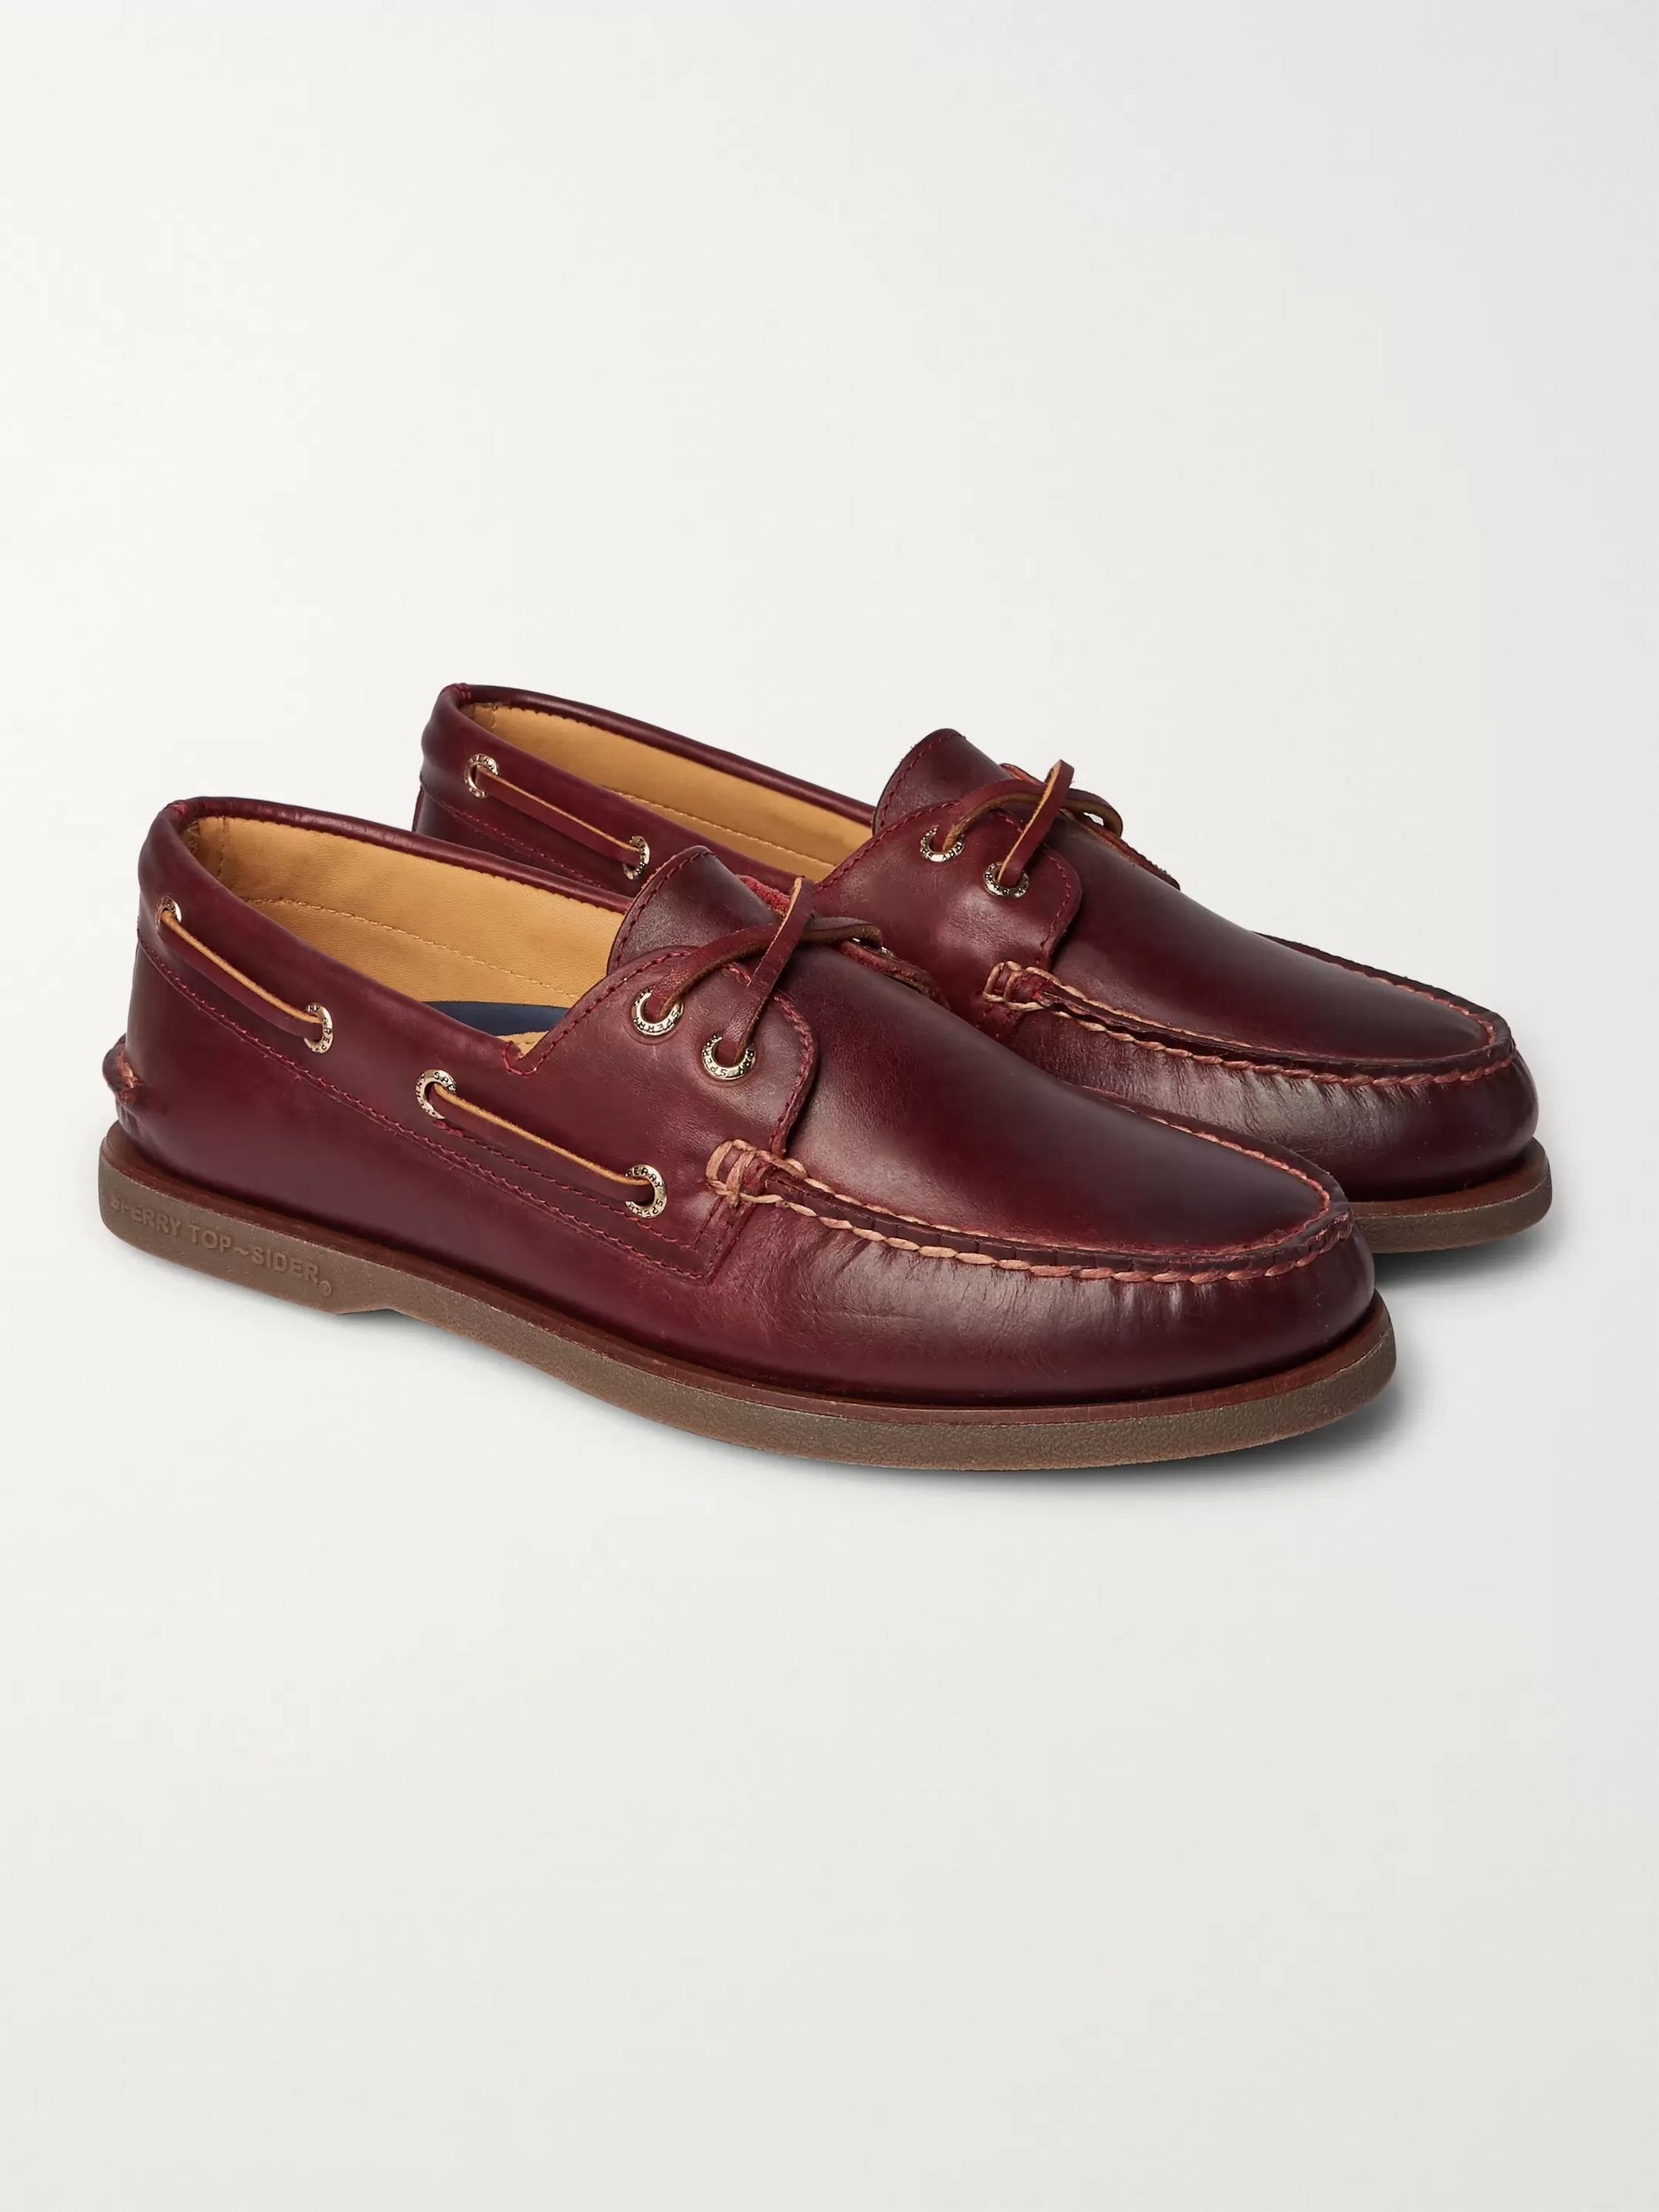 sperry gold cup topsiders